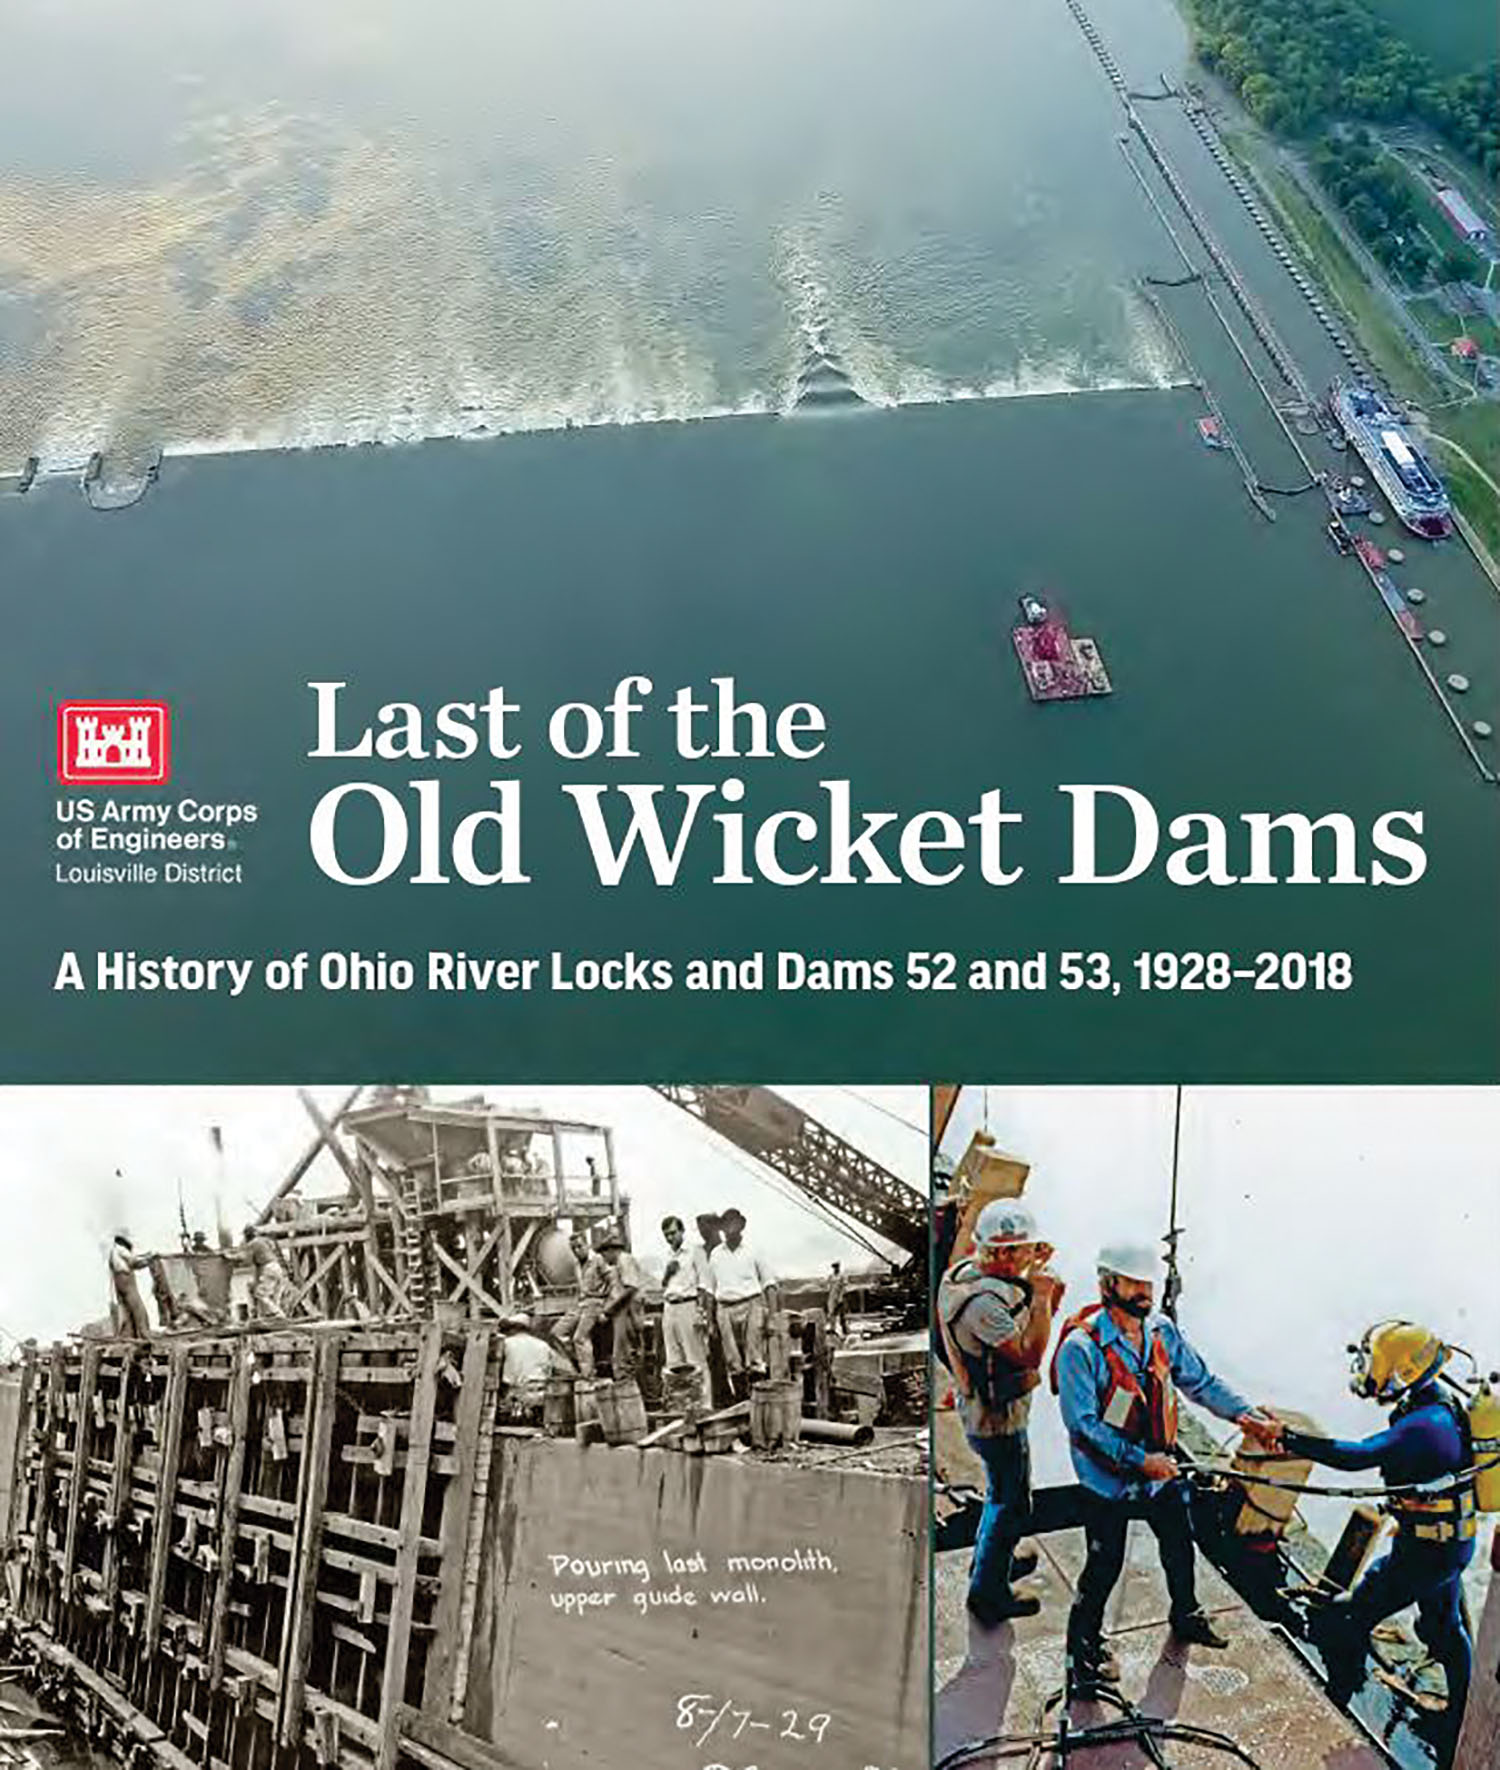 New Book Details Last Ohio River Wicket Dams’ History